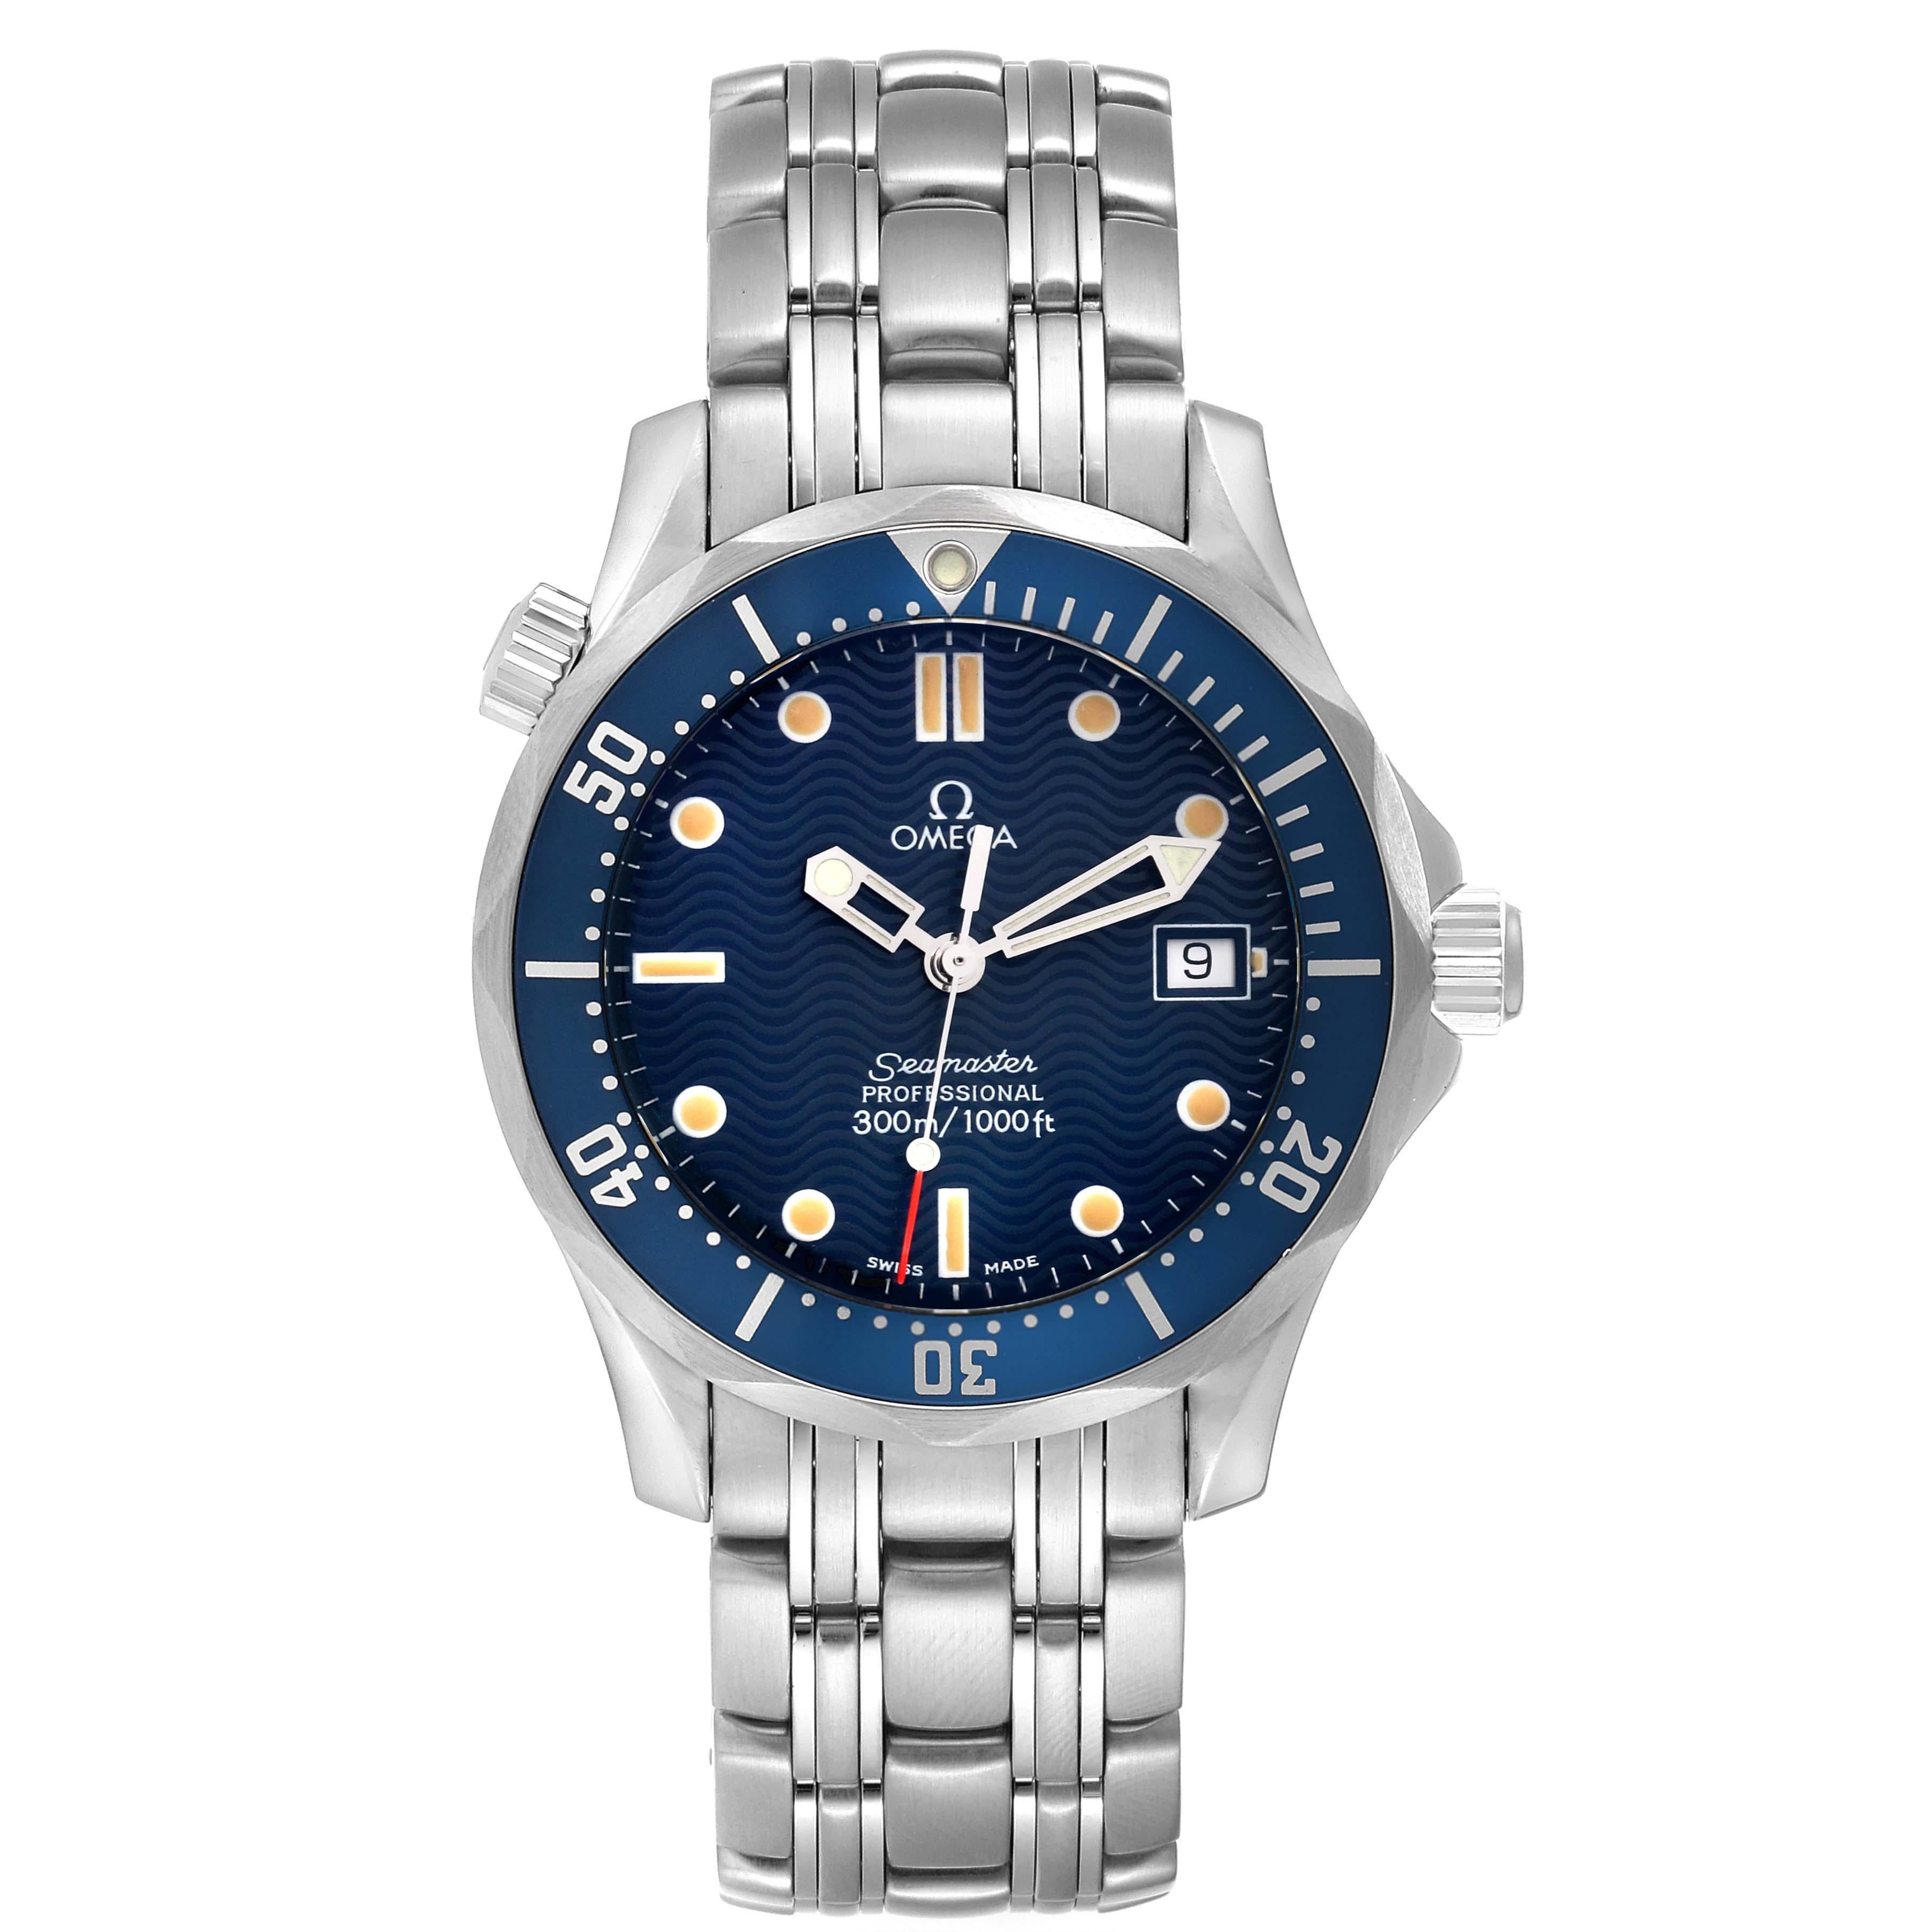 Omega Seamaster Diver 300M Midsize Quartz Steel Mens Watch 2561.80.00. Quartz movement. Stainless steel case 36.25 mm in diameter. Helium escape valve at 10 o'clock. Omega logo on the crown. Blue unidirectional rotating bezel. Scratch resistant